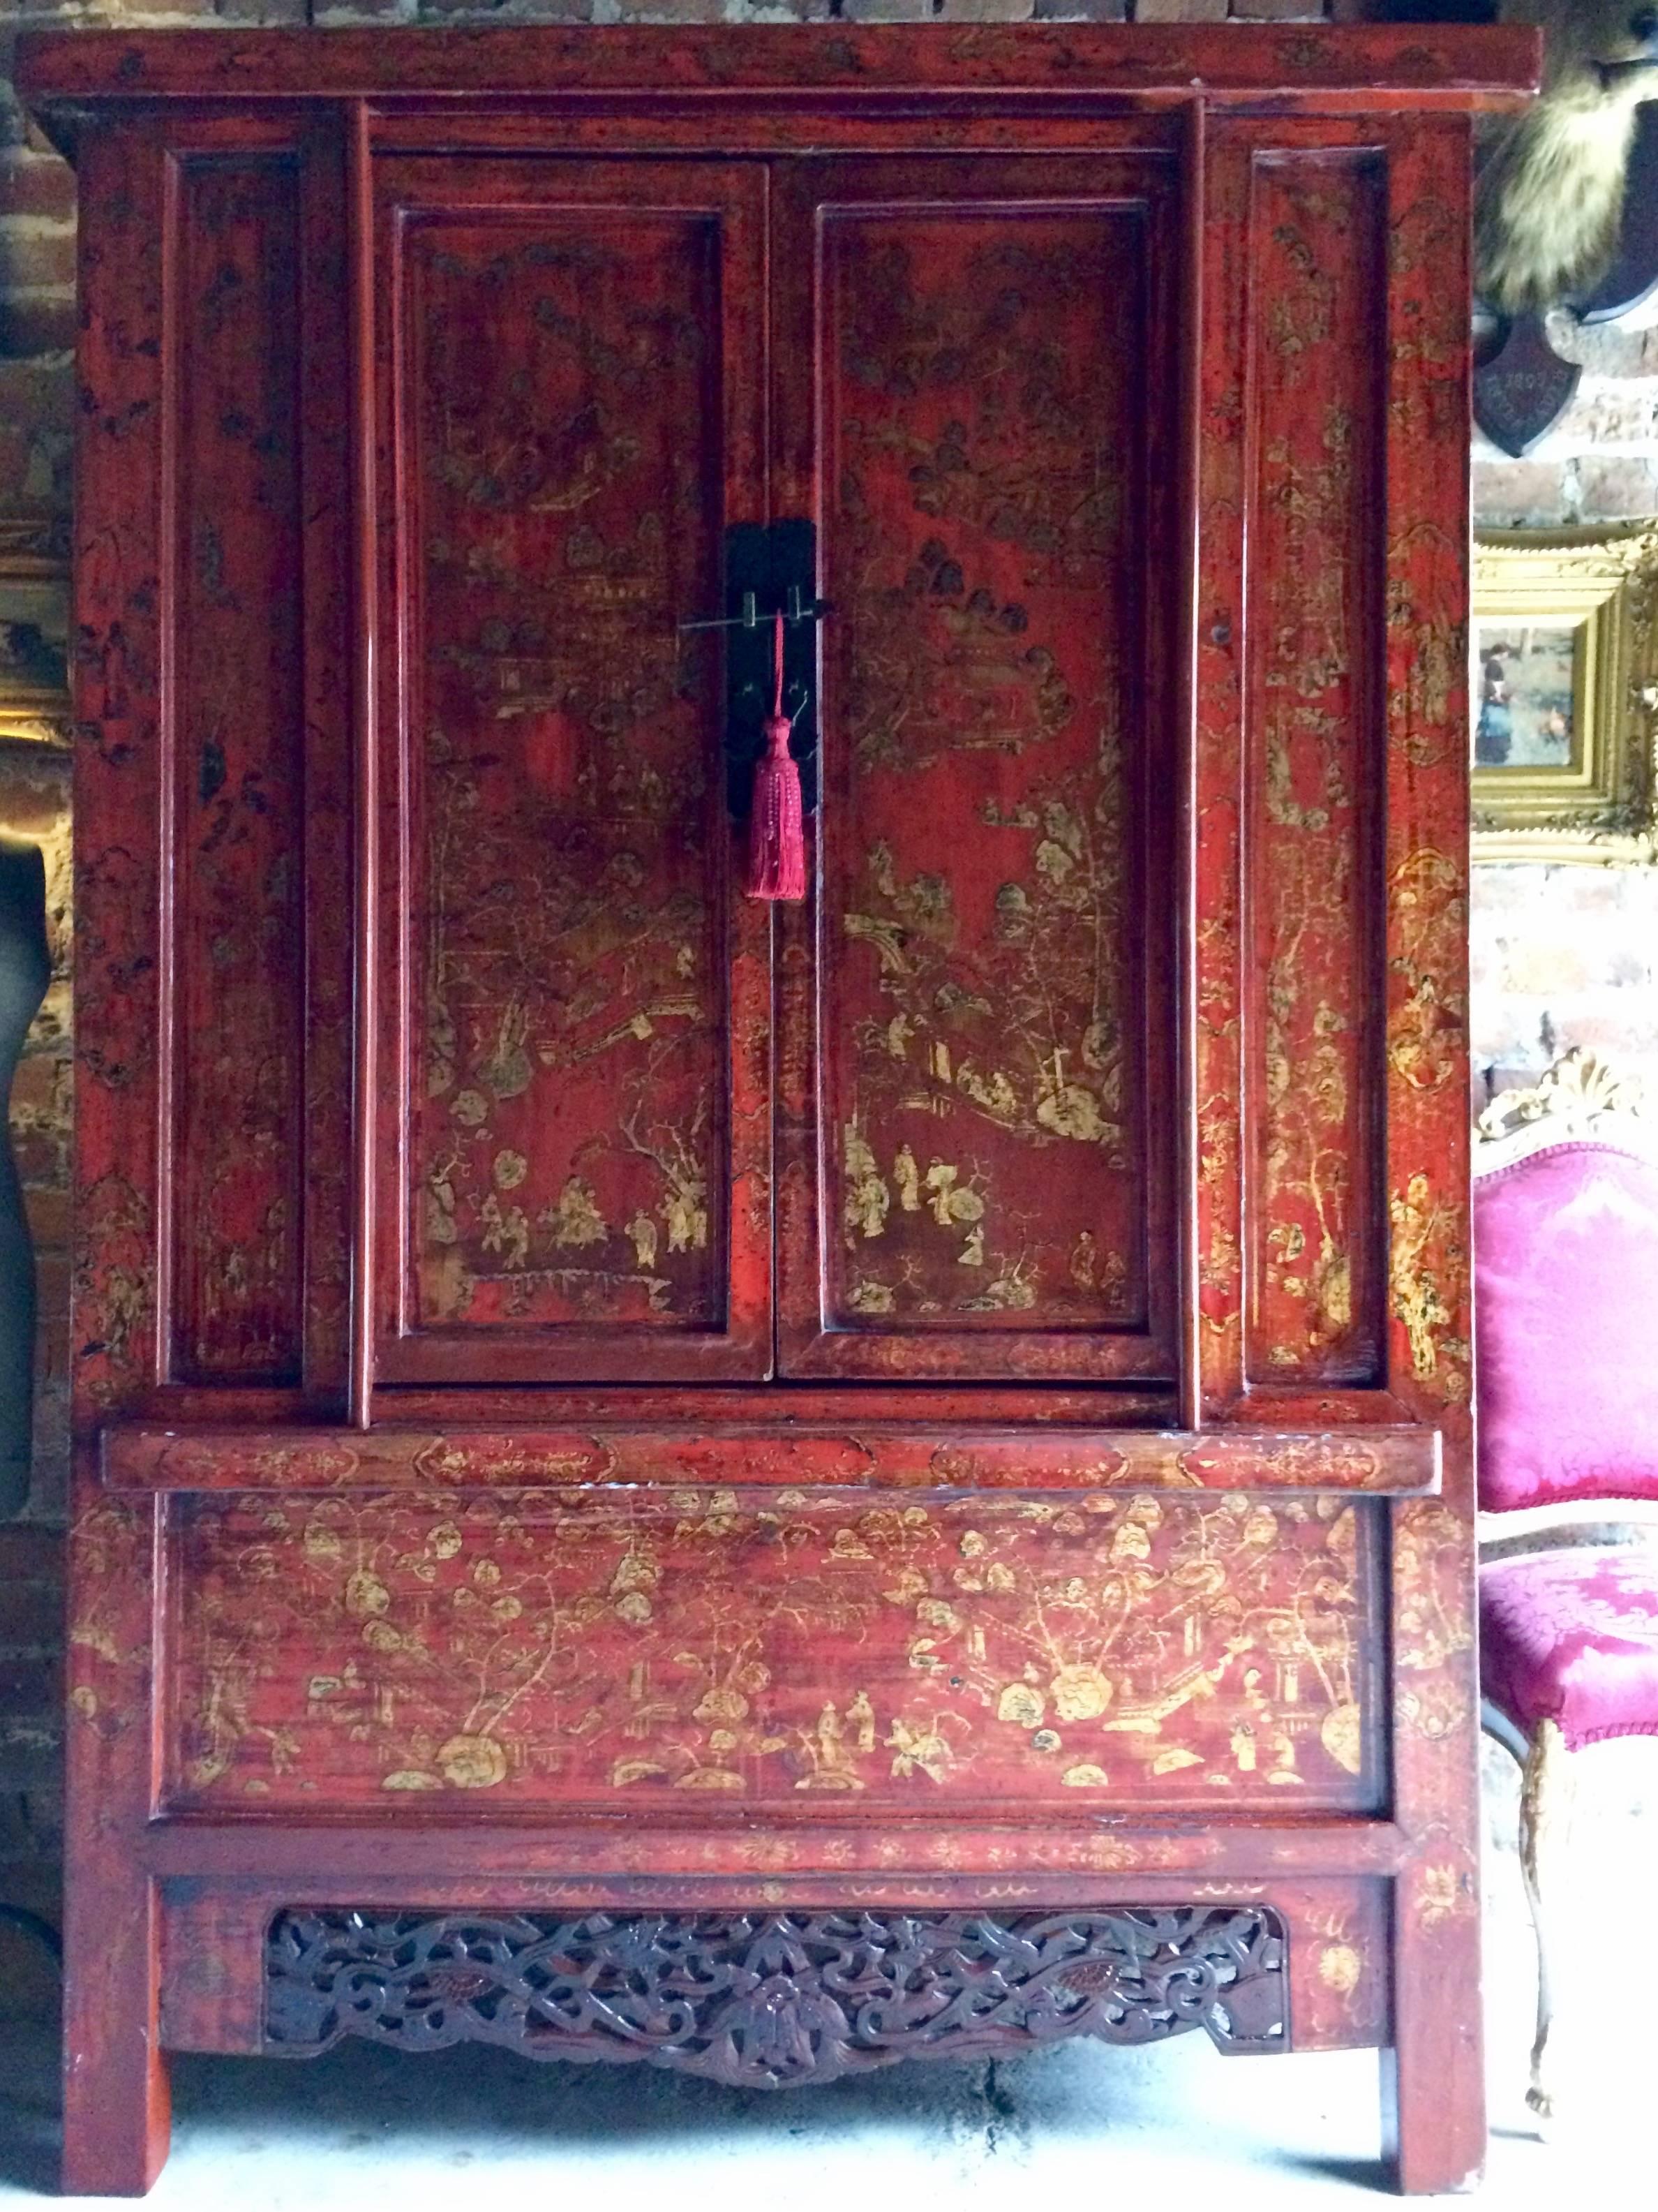 A stunning antique 19th century elm Chinese lacquered chinoiserie two door wardrobe armoire, circa 1899 from the Shanxi region of China, decorated in red lacquer and gilt featuring pagoda's village scenes, rivers, boats, flowers and dragons, two